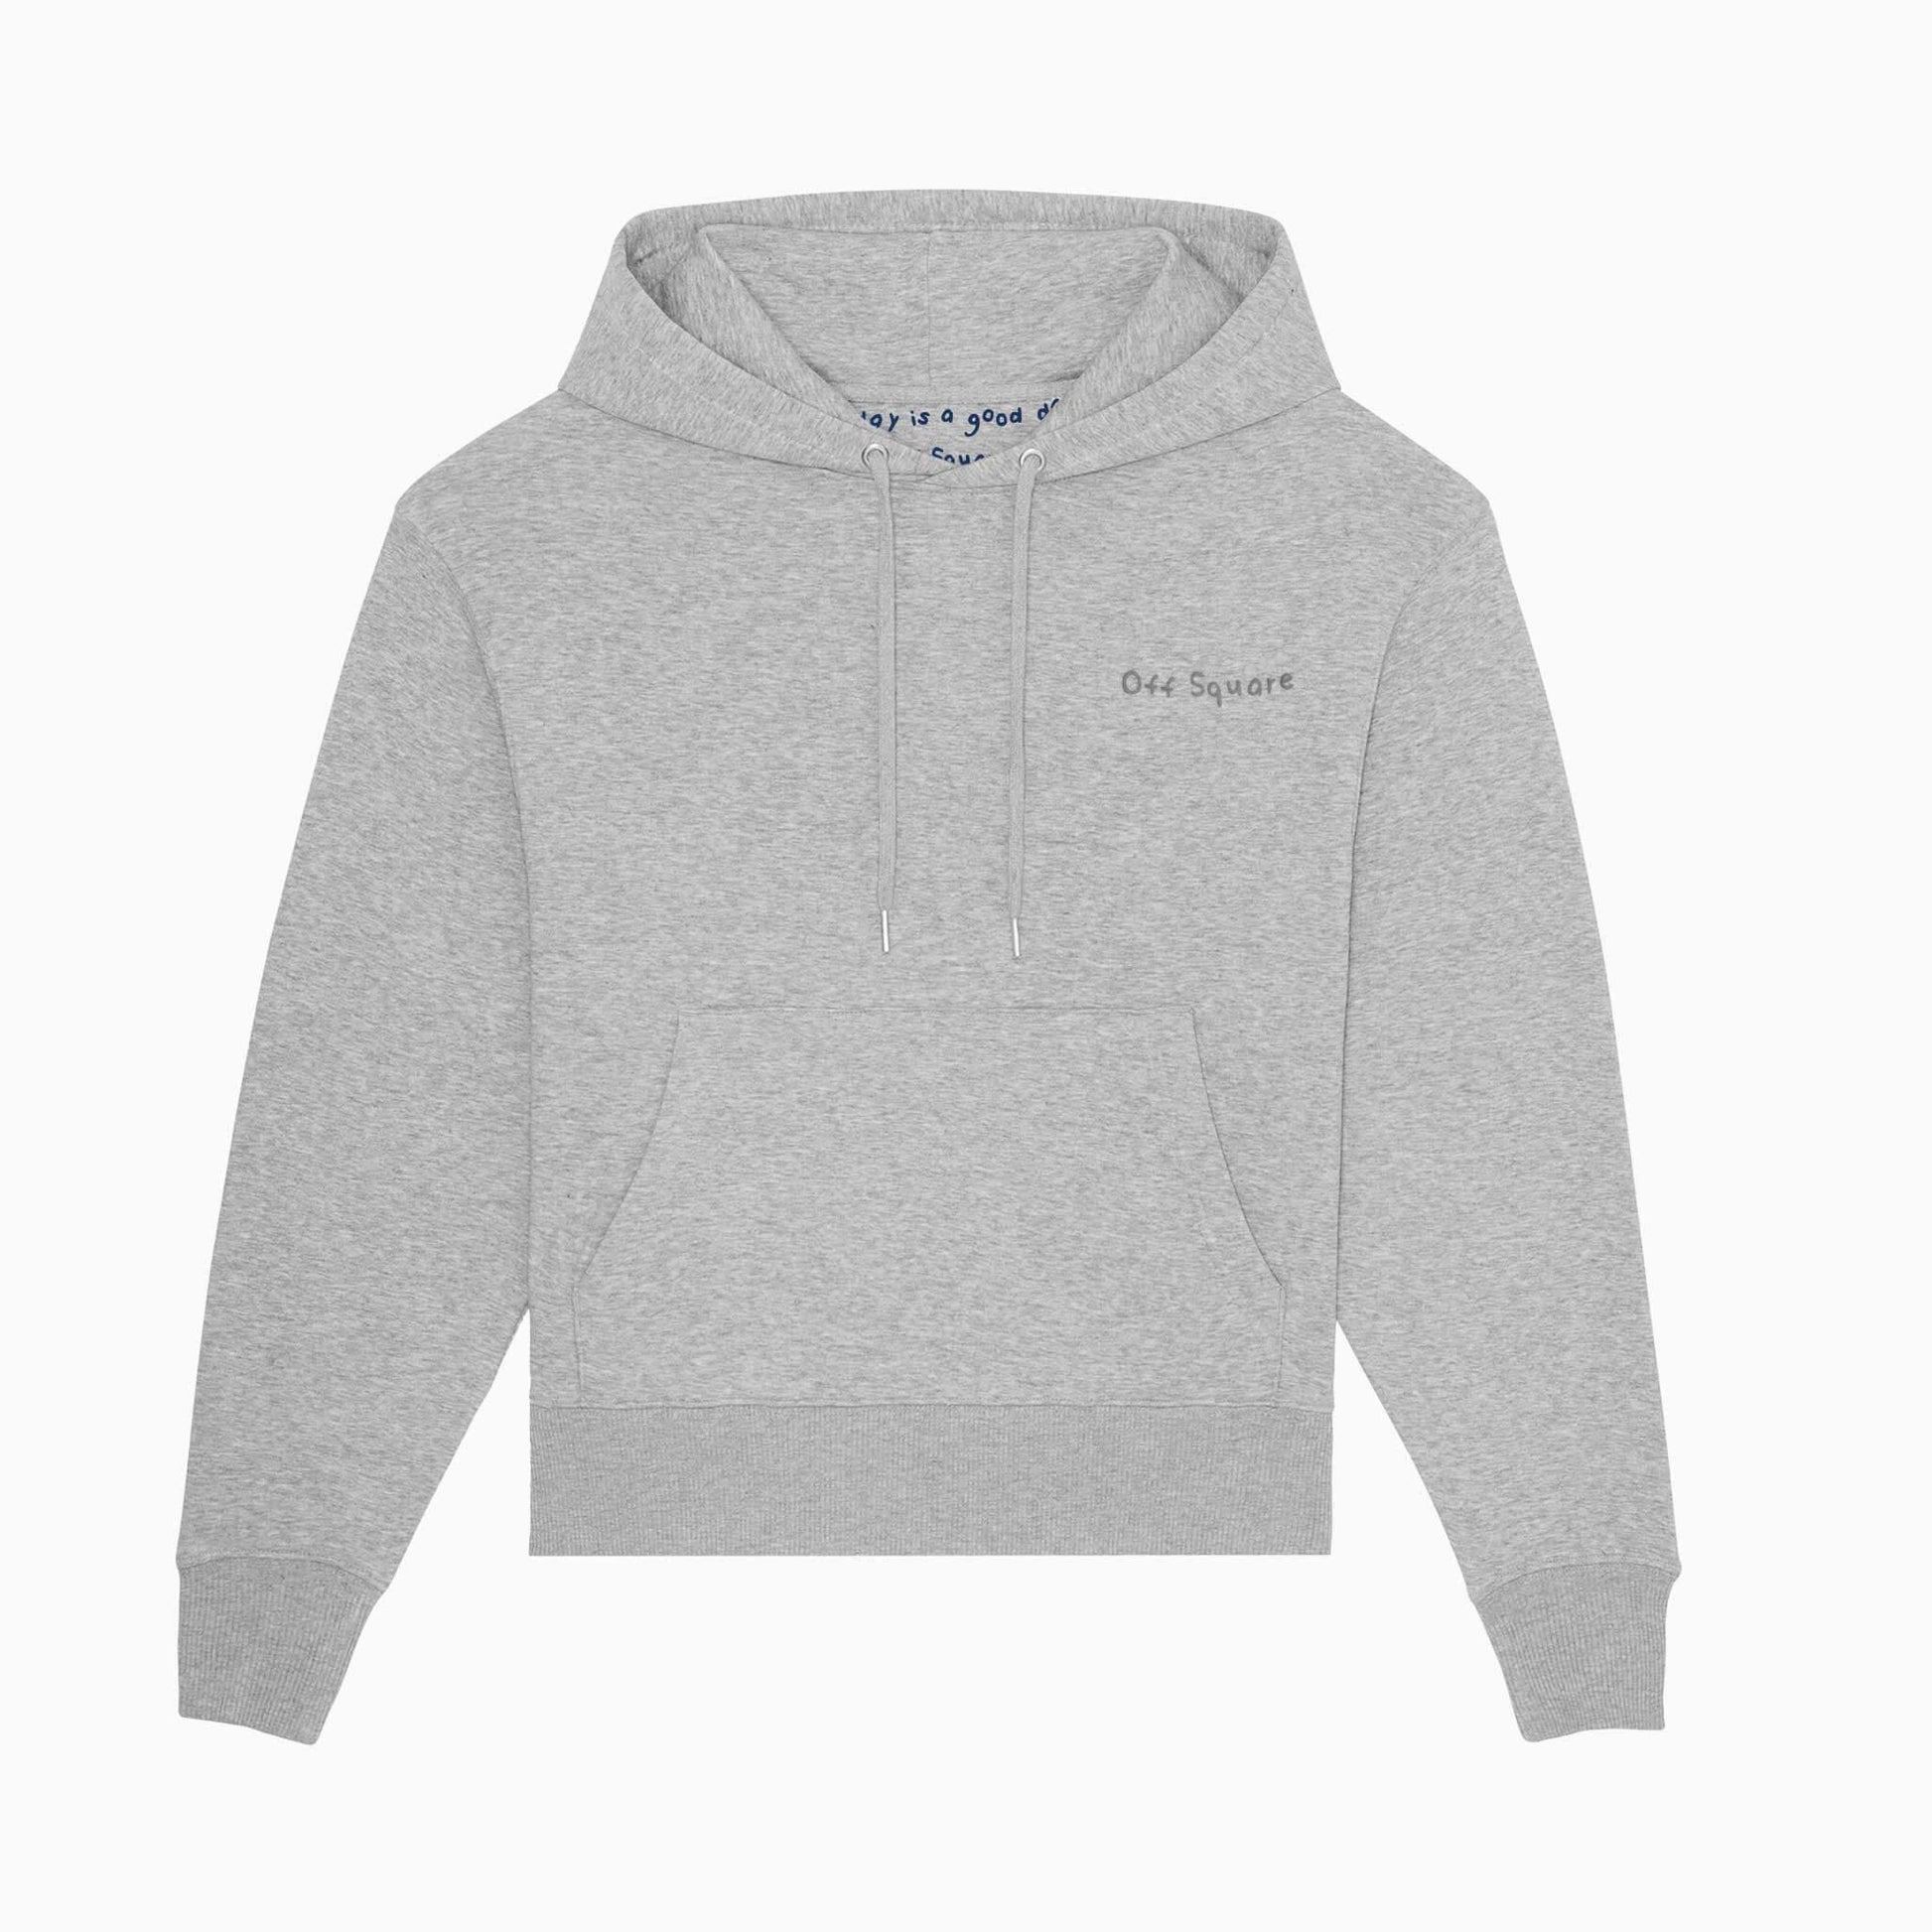 Unisex Hooded Sweater Don't be A Square - offsquareofficial